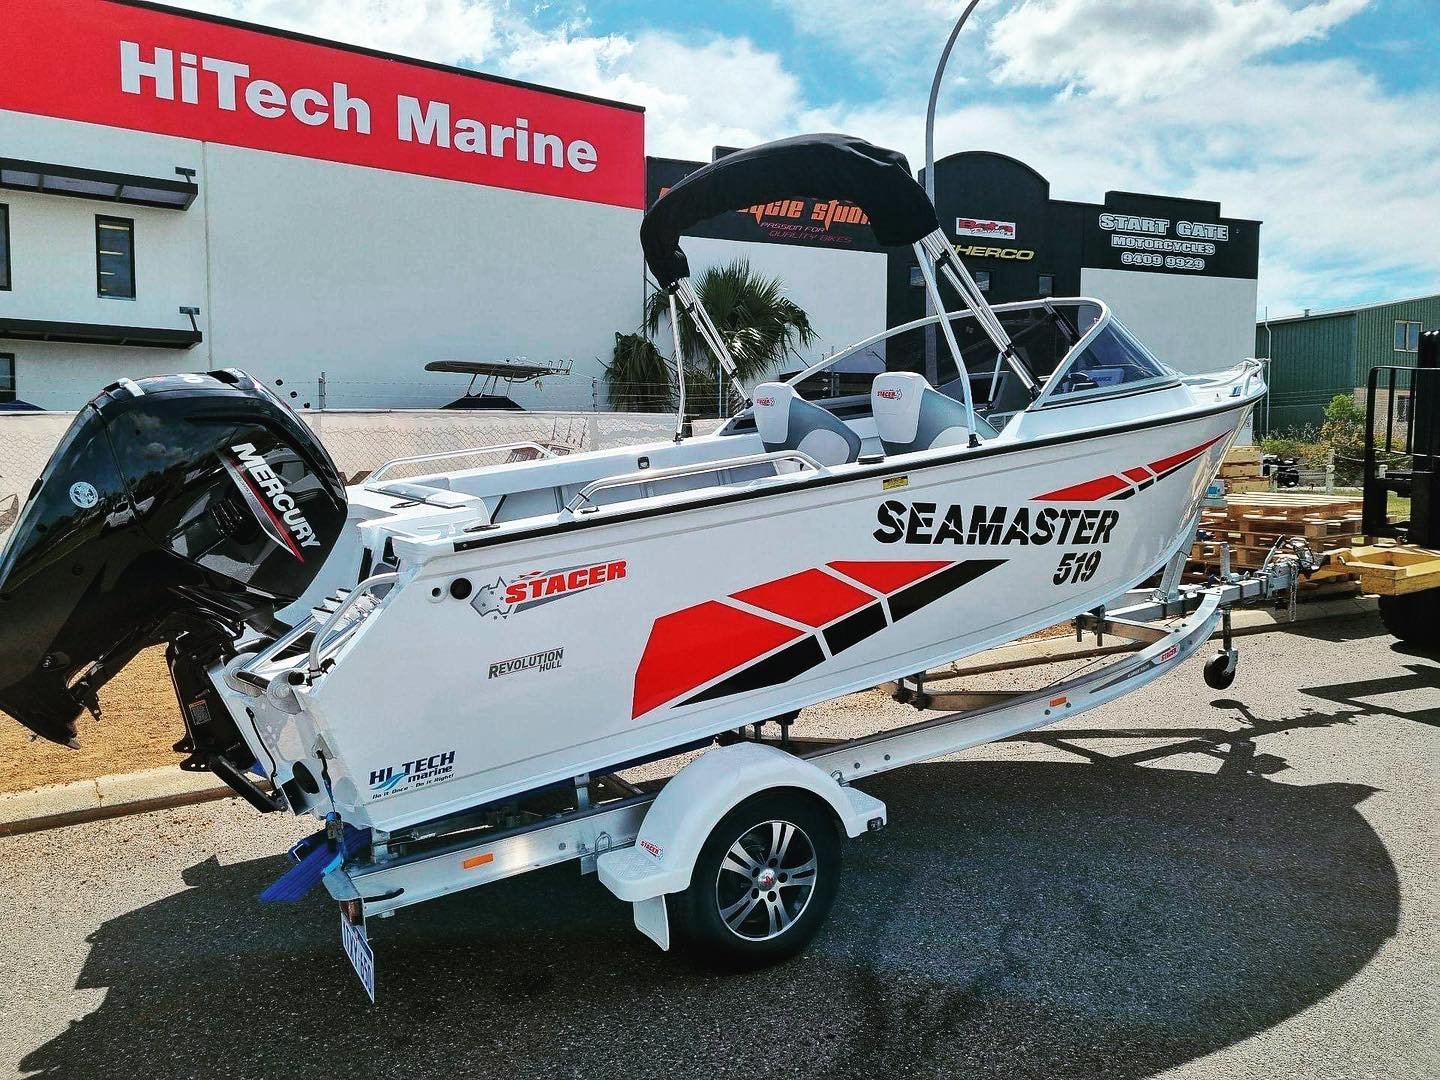 Giveaway -Stabicraft-1550-Fisher-WA-Perth-Residents-only-Get-your-entries-to-enter-the-draw-to-win-a-stabicraft- boat-black-western-Australia-Perth-WA-13 - Hi Tech MarineHi Tech Marine